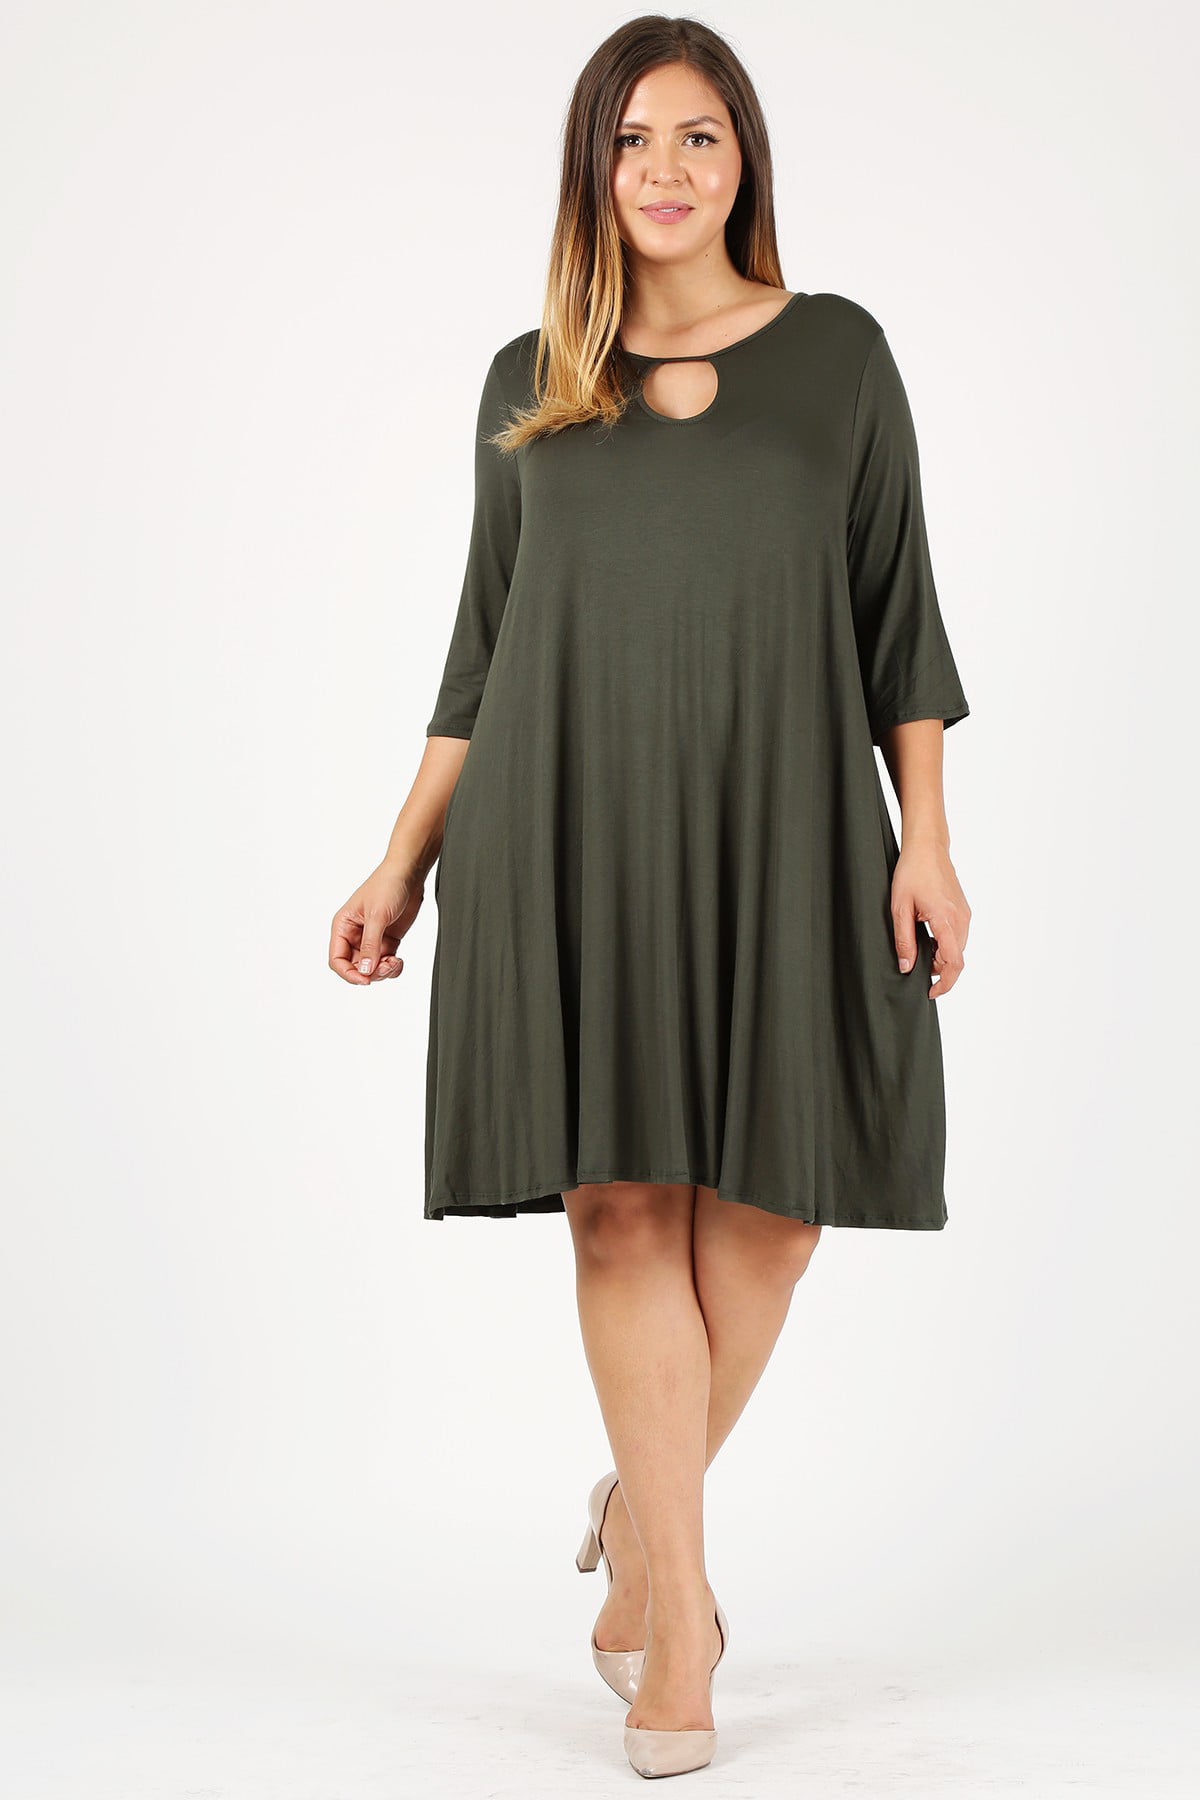 Sweet Lindsey - Women's plus size dress with a relaxed fit key-hole ...